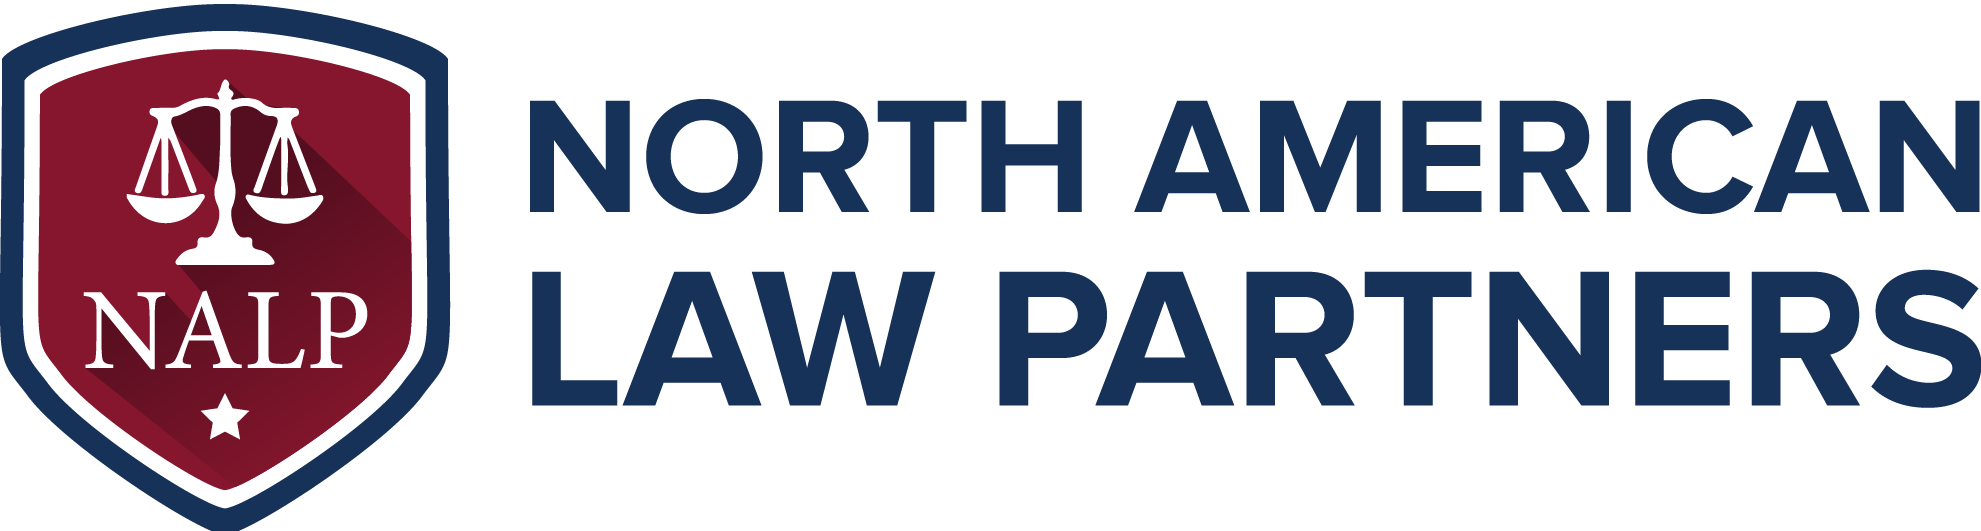 North American Law Partners